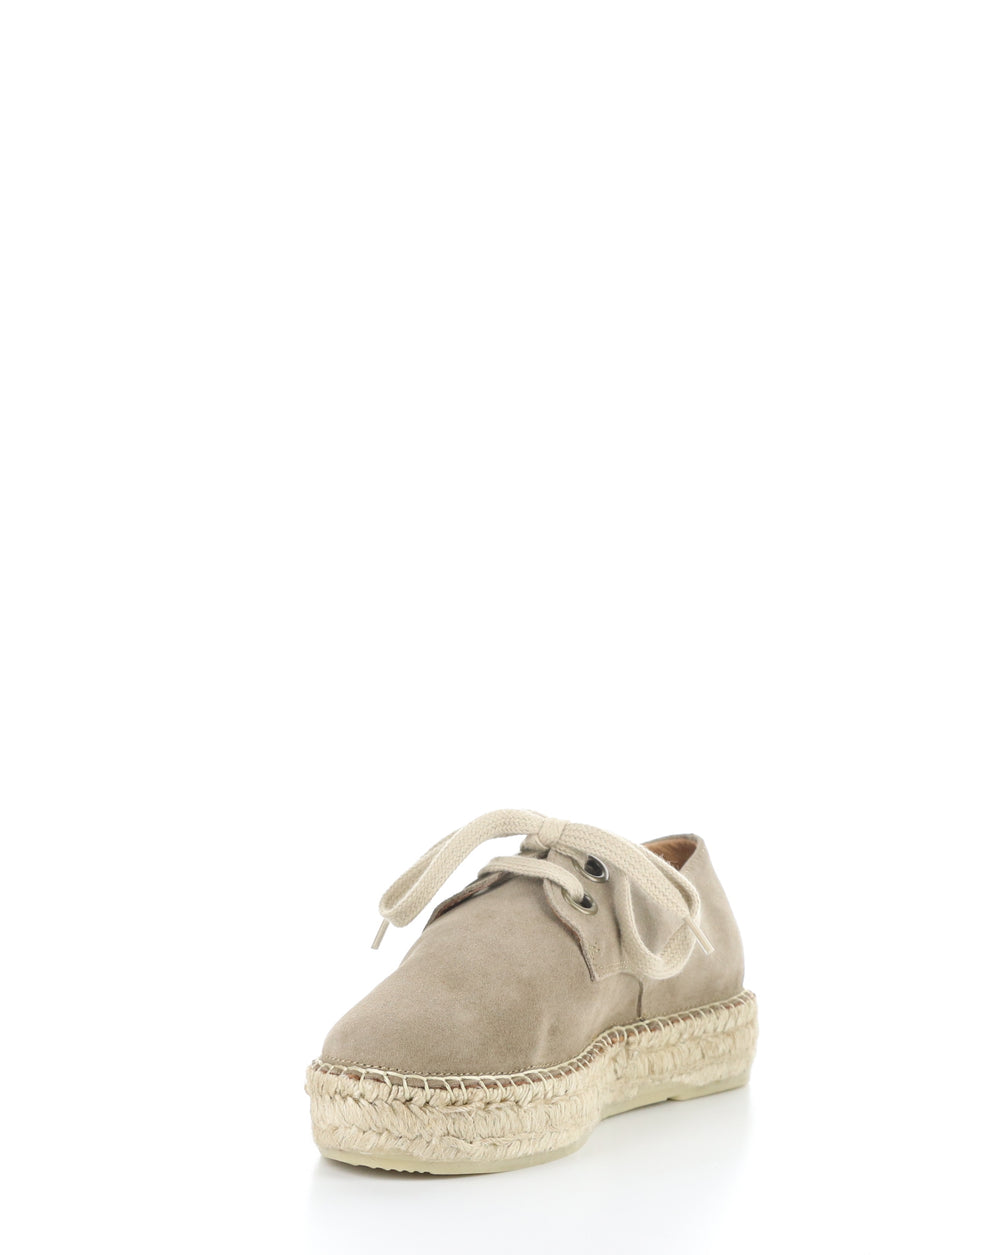 PETH525FLY 002 BEIGE Lace-up Shoes